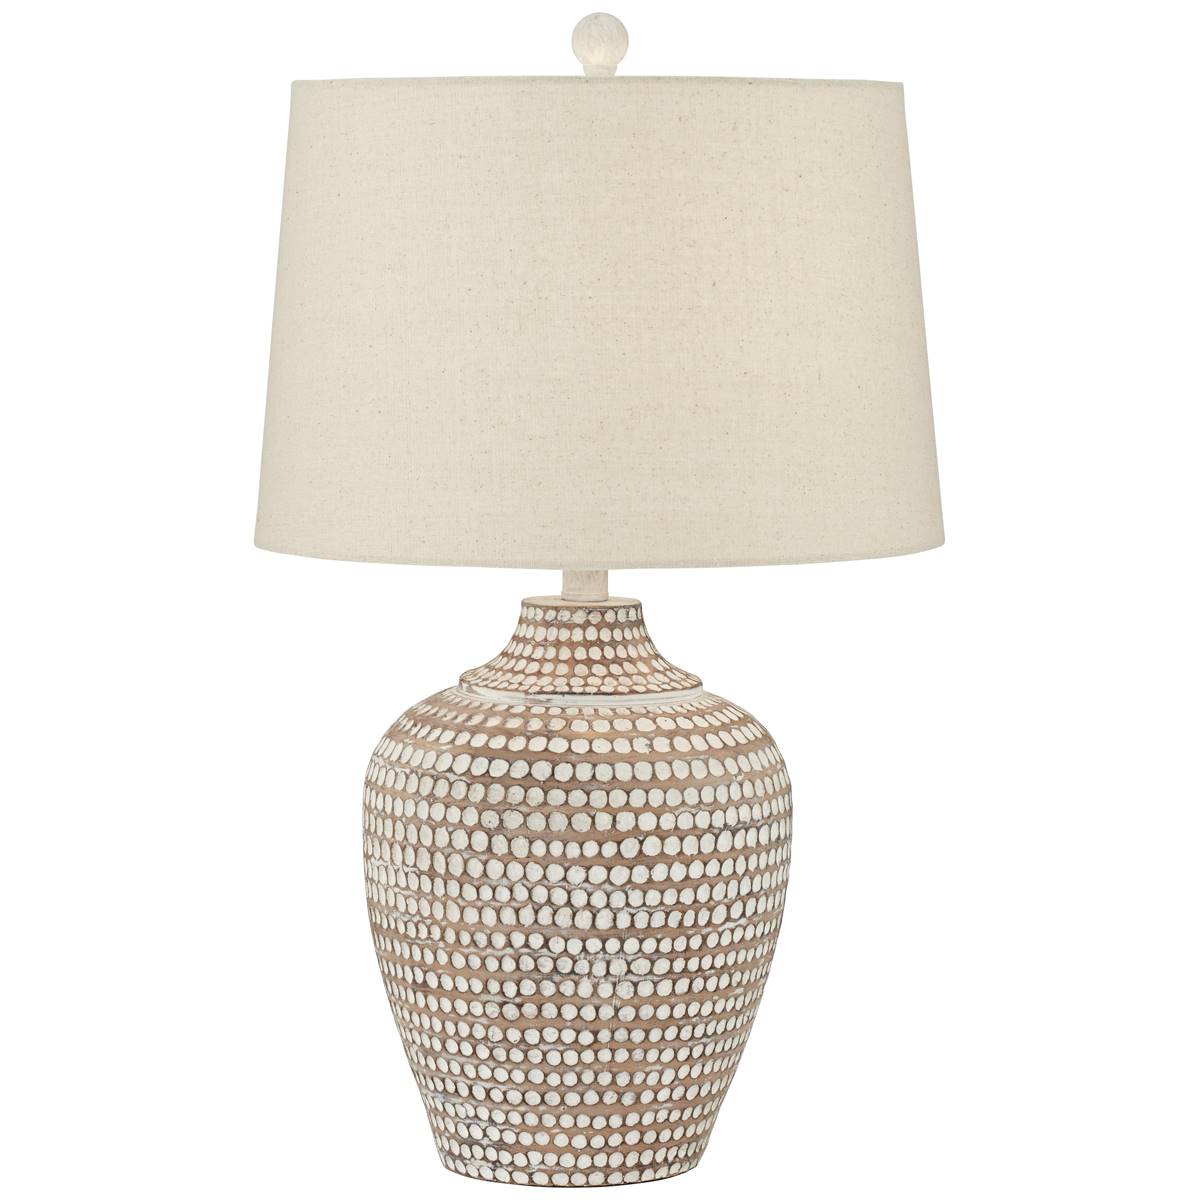 Pacific Coast Lighting Alese 26in. Brown Table Lamp